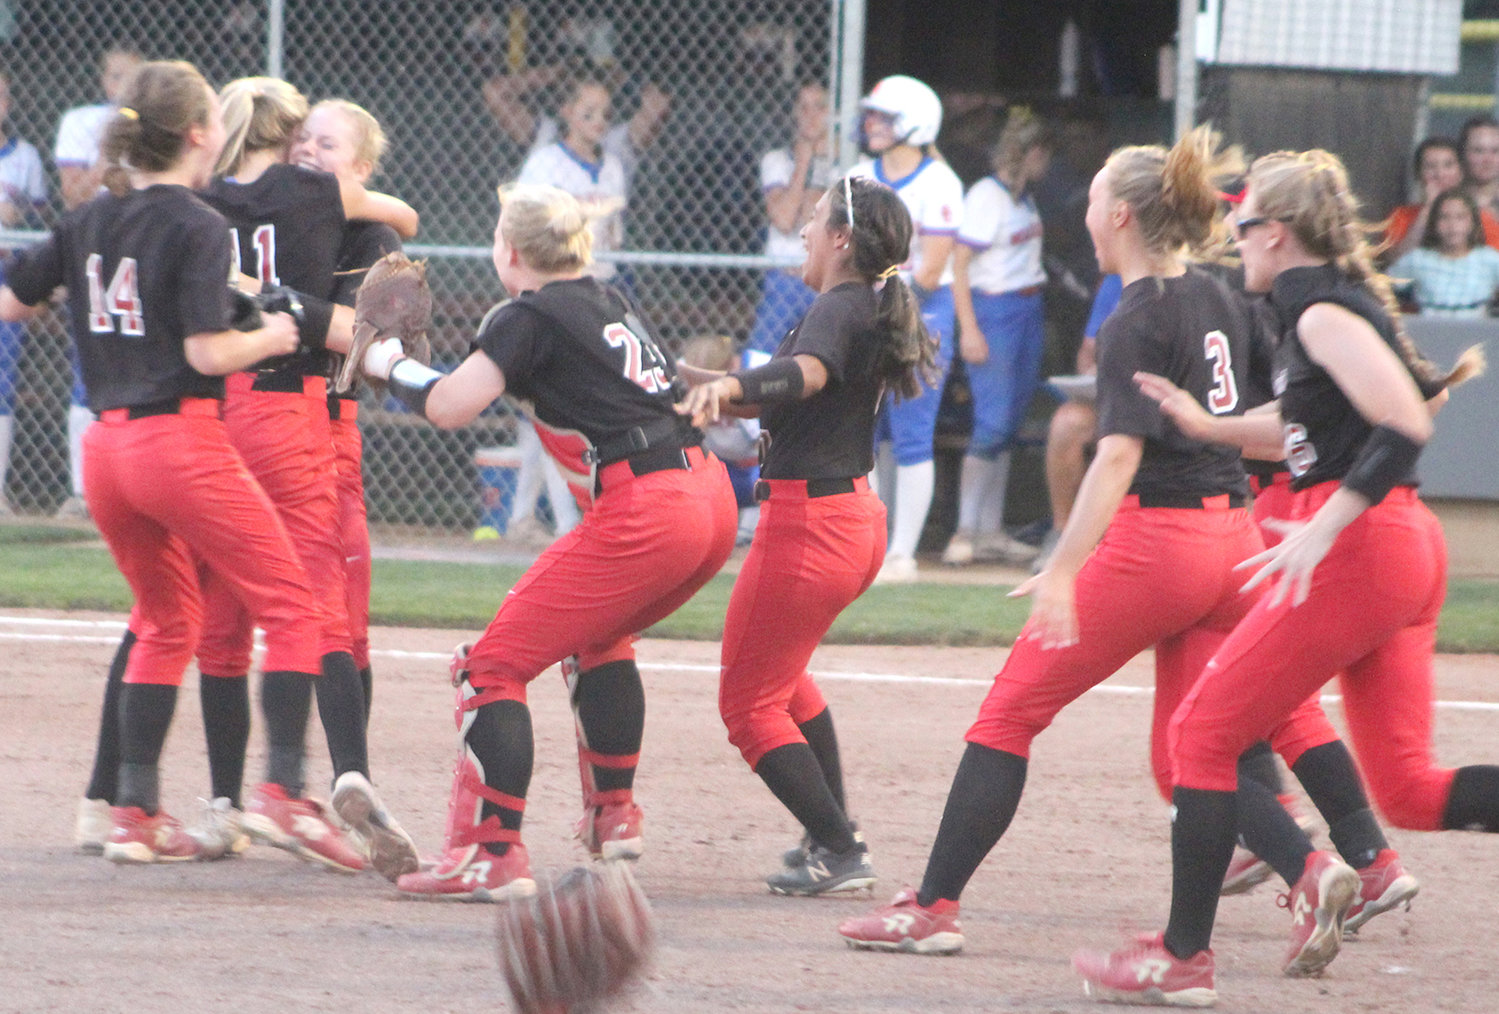 The Estherville Lincoln Central Softball Team won each of its three regional games by just one run to qualify for the 2021 State Softball Tournament.